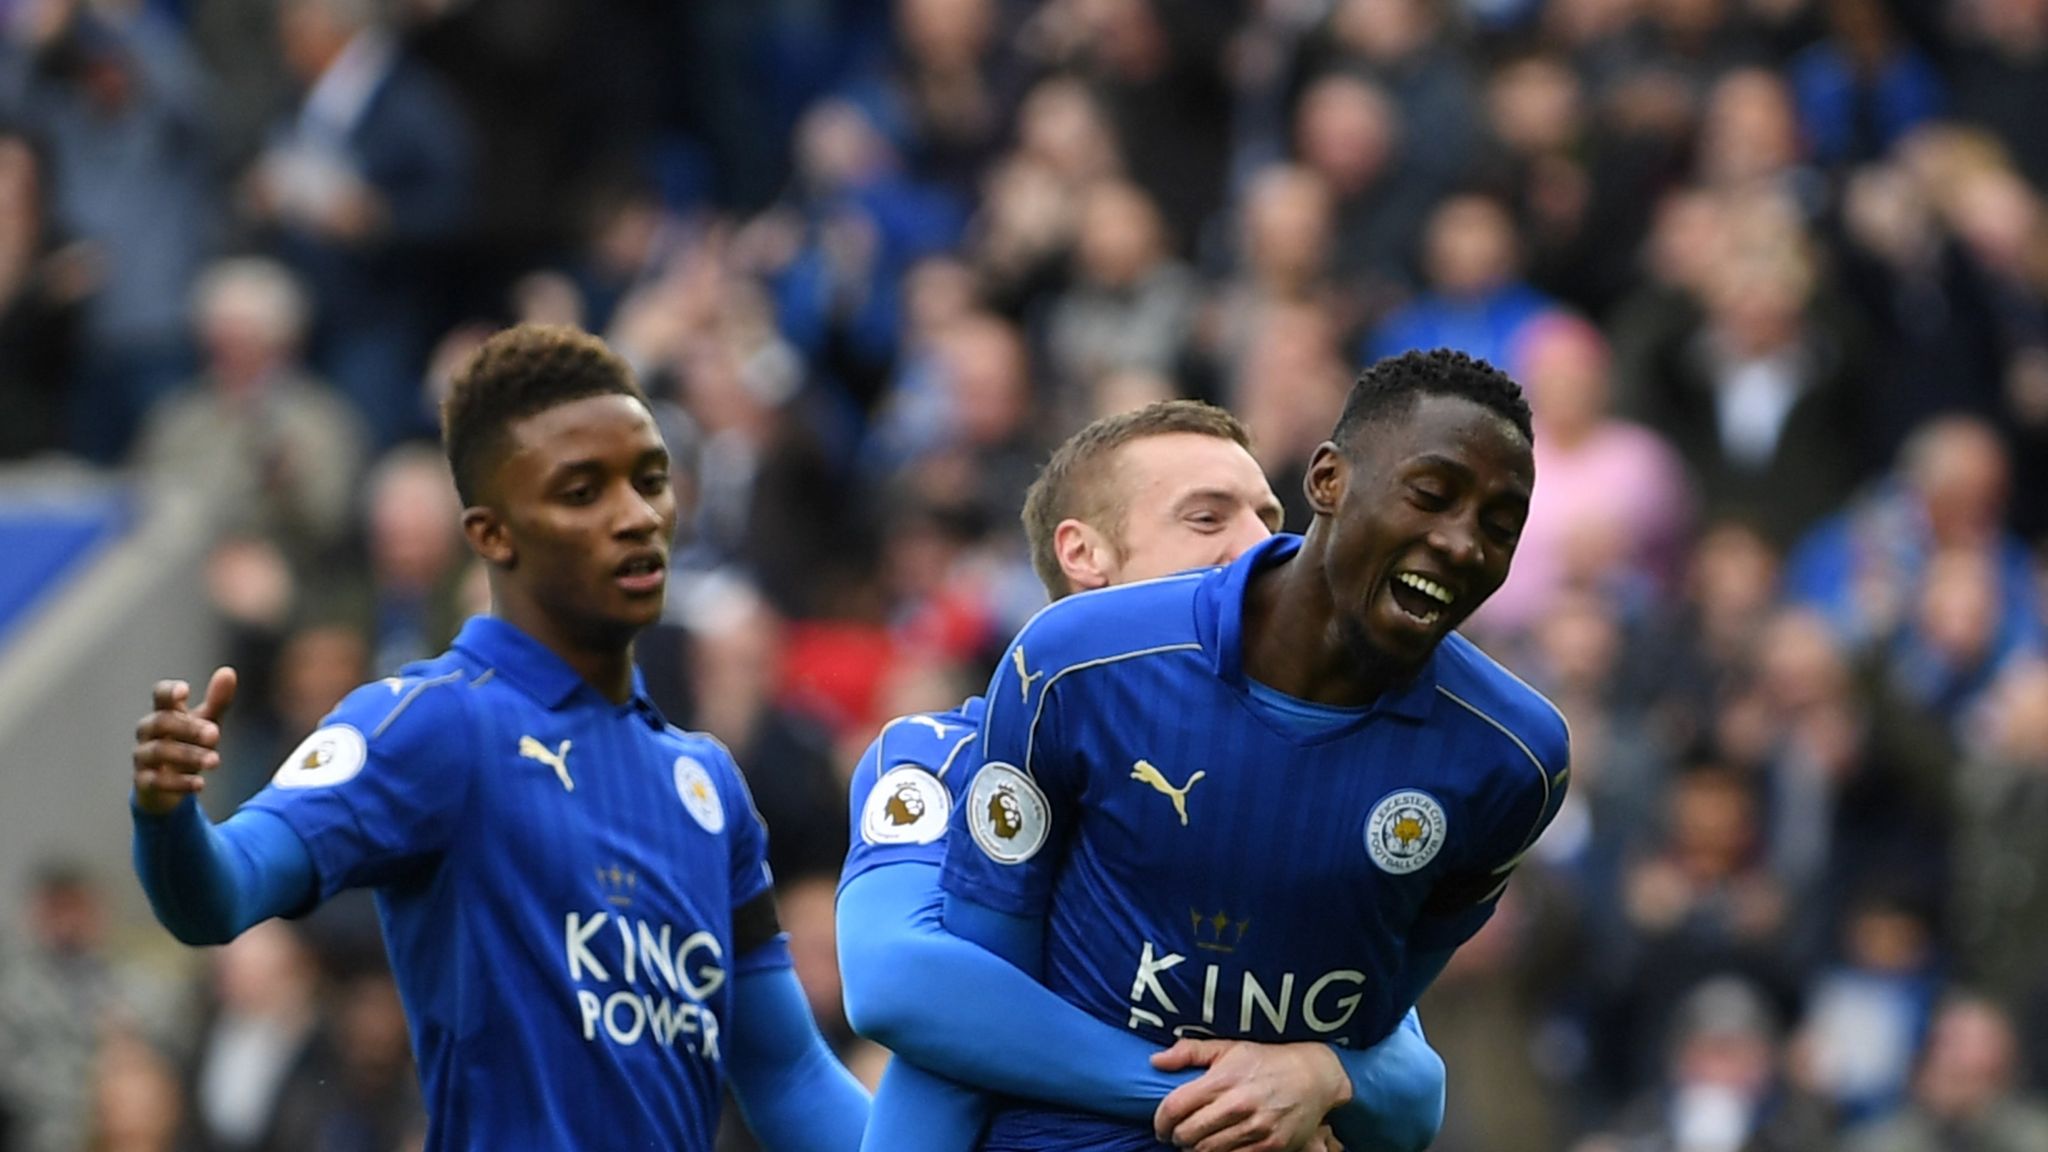 Leicester City 2 0 Stoke City Foxes Move Clear Of Drop Zone Football News Sky Sports